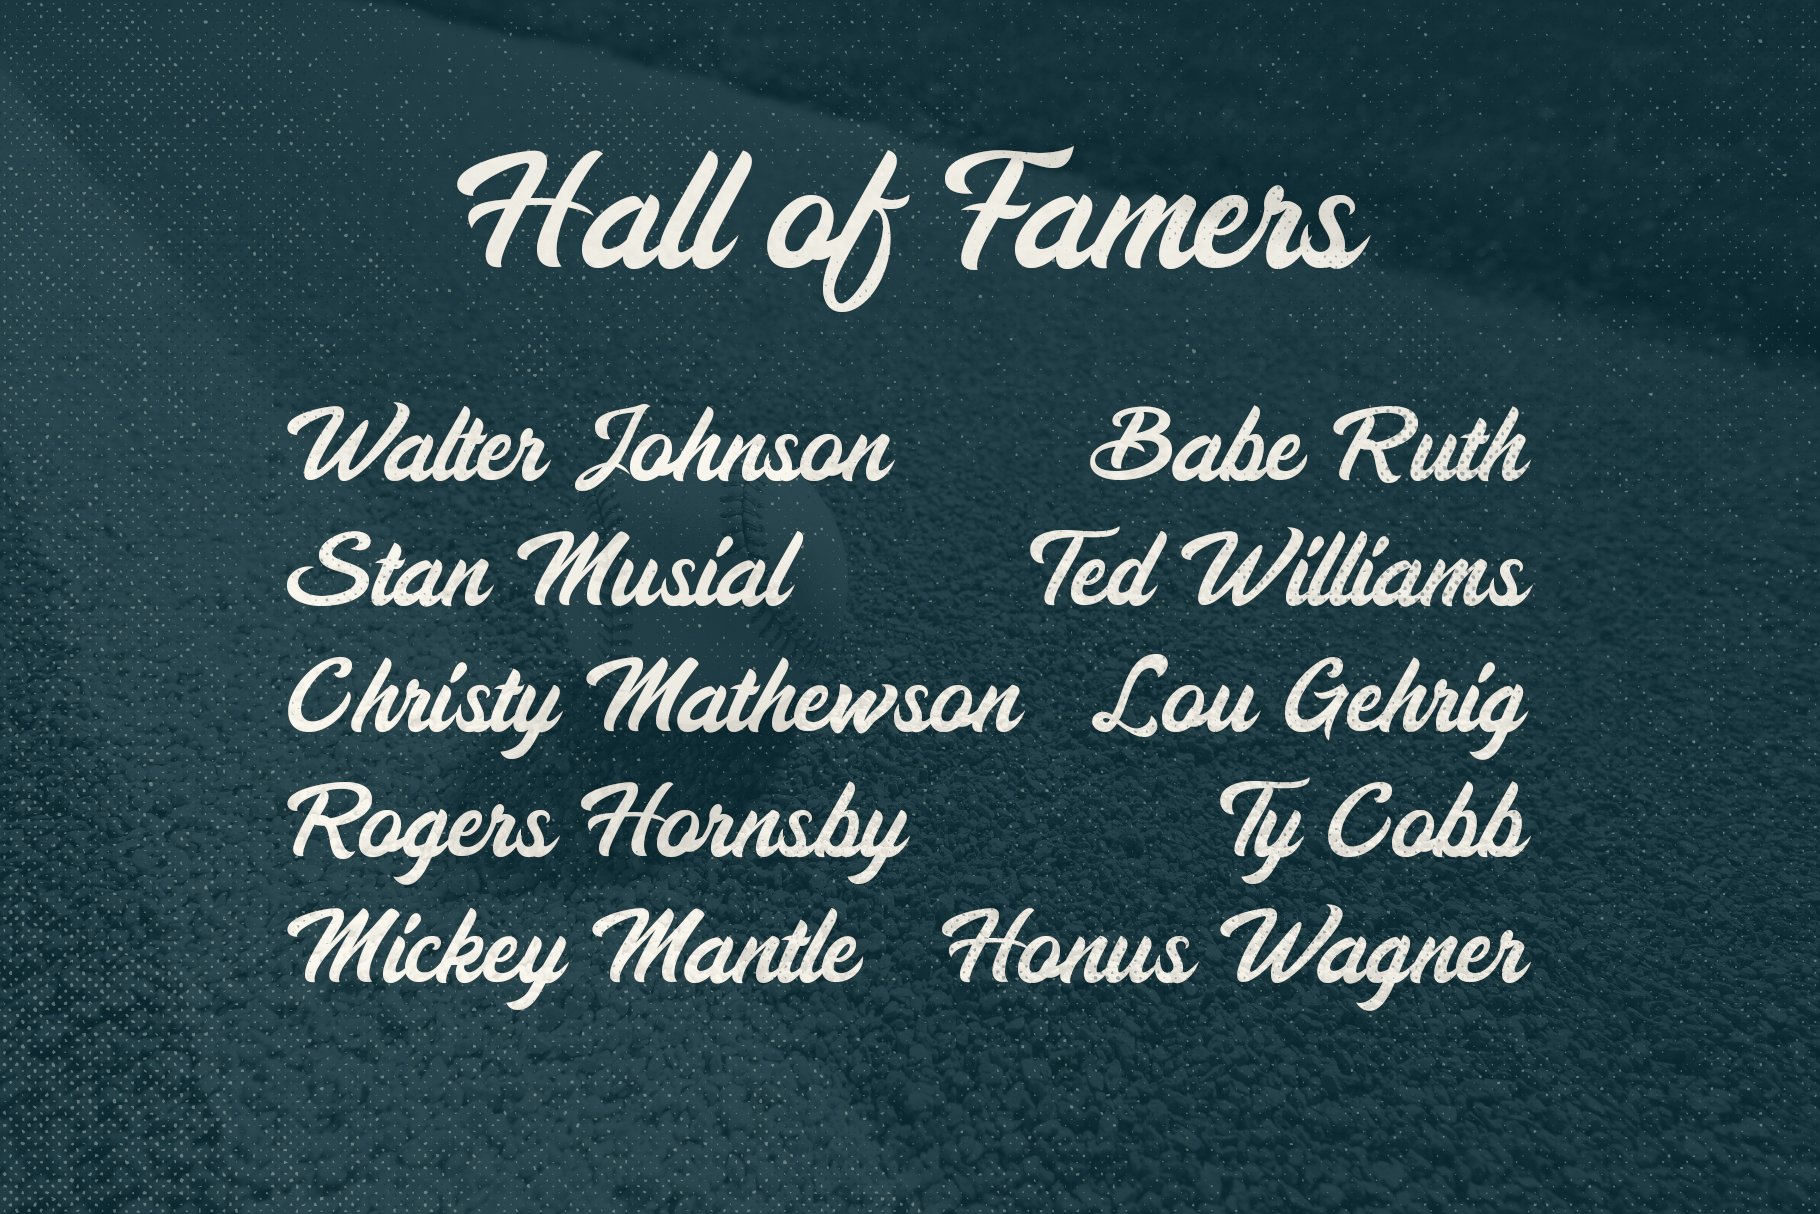 strikeout hall of famers 331